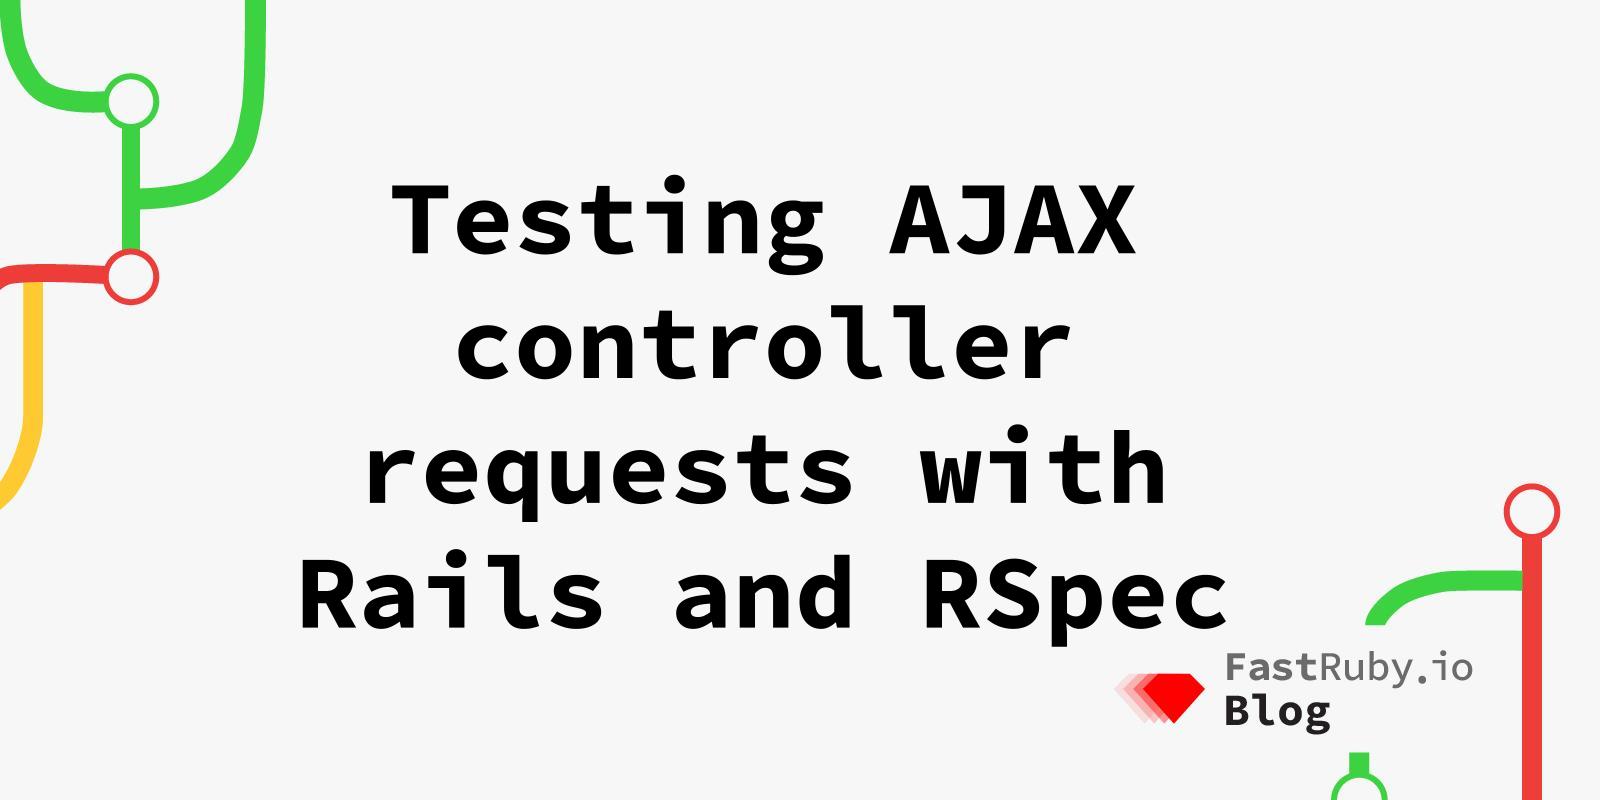 Testing AJAX controller requests with different versions of Rails and RSpec